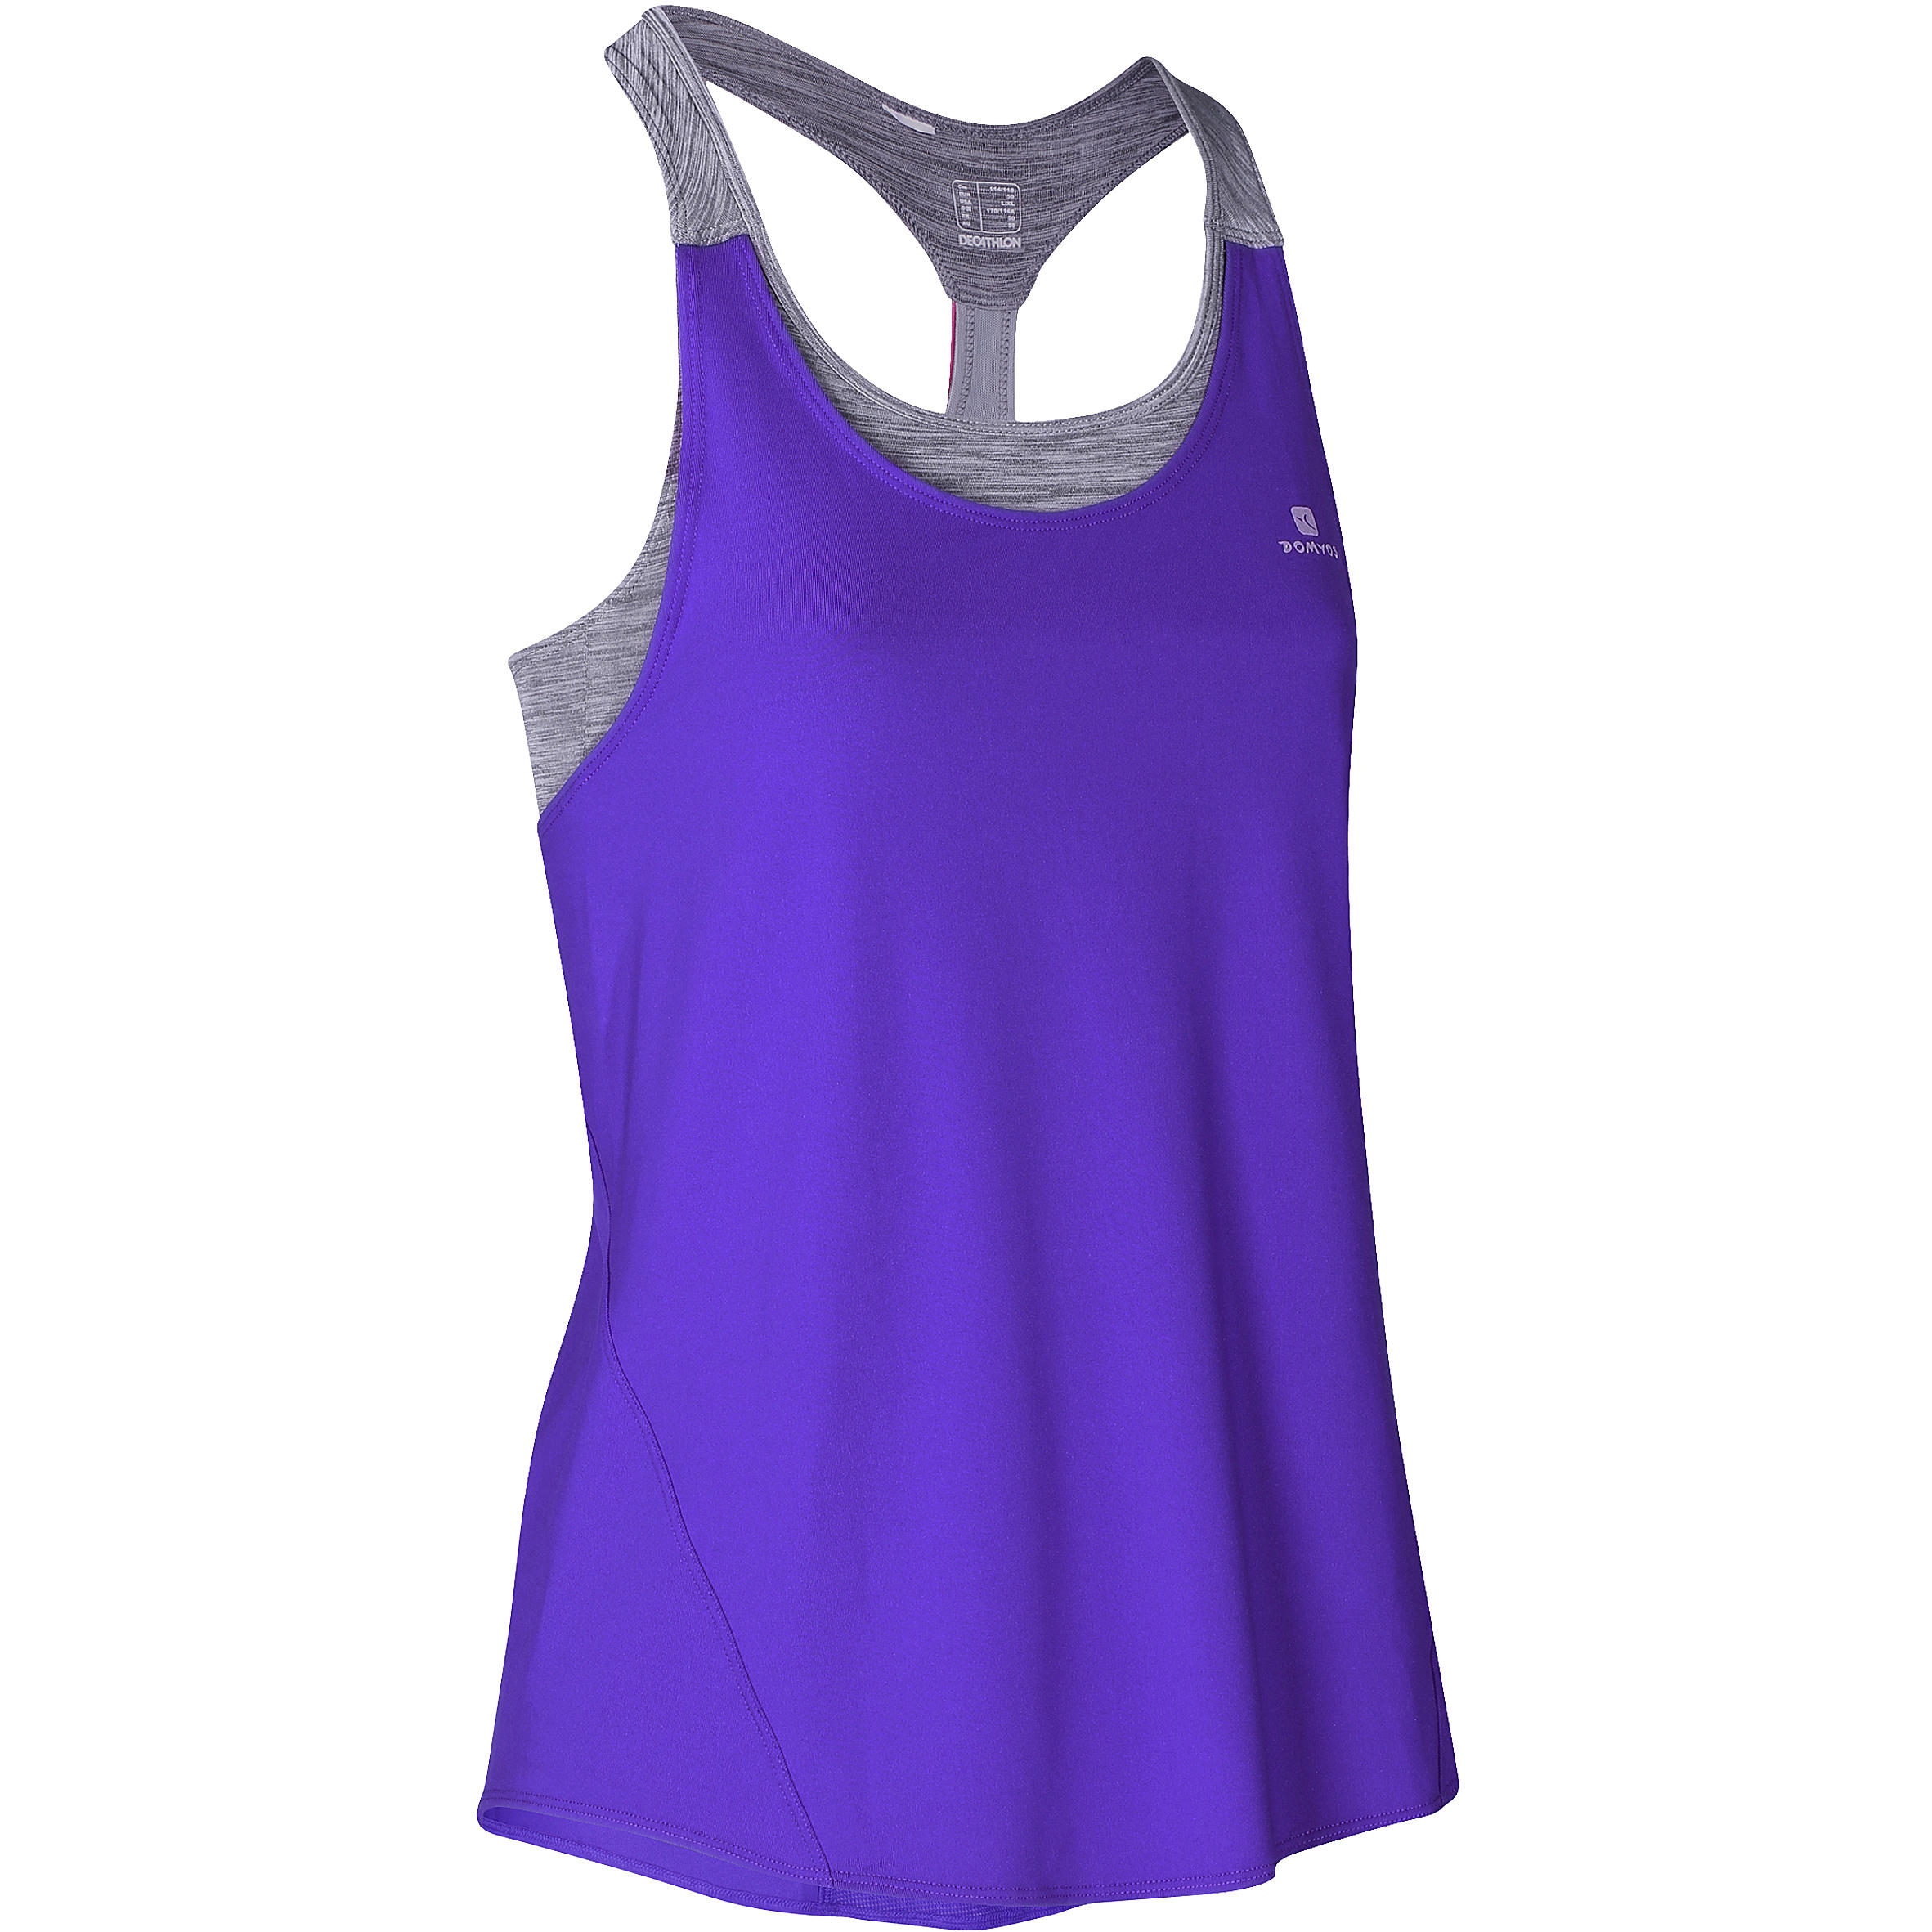 DOMYOS Energy+ Women's Fitness Tank Top with Built-in Bra - Blue/Grey